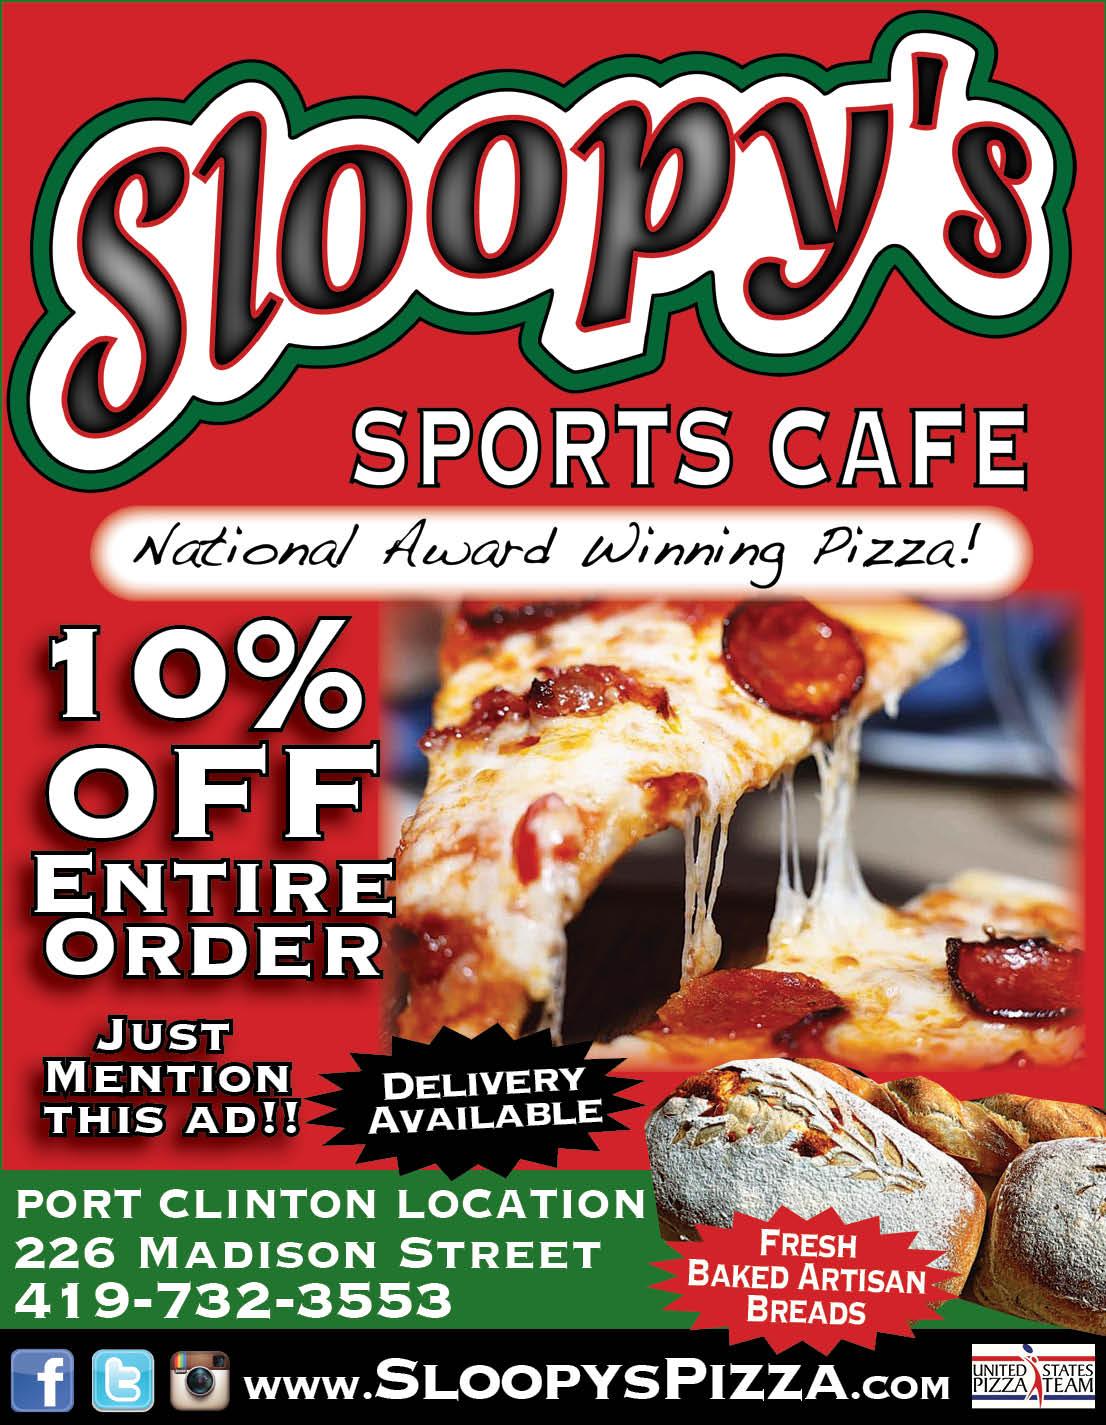 Sloopy’s Sports Cafe – Port Clinton